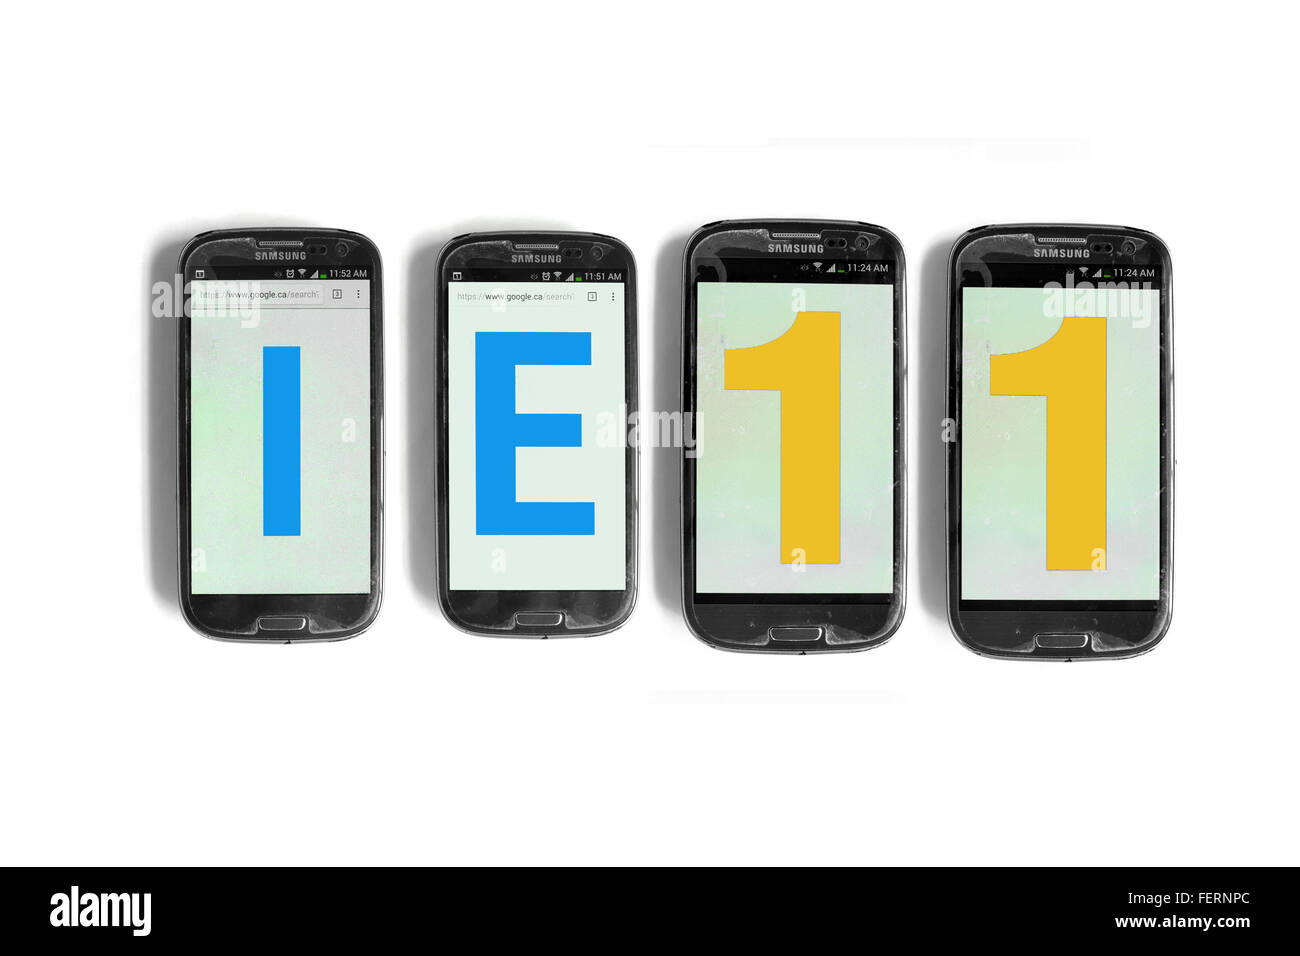 IE11 on the screens of smartphones photographed against a  white background. Stock Photo